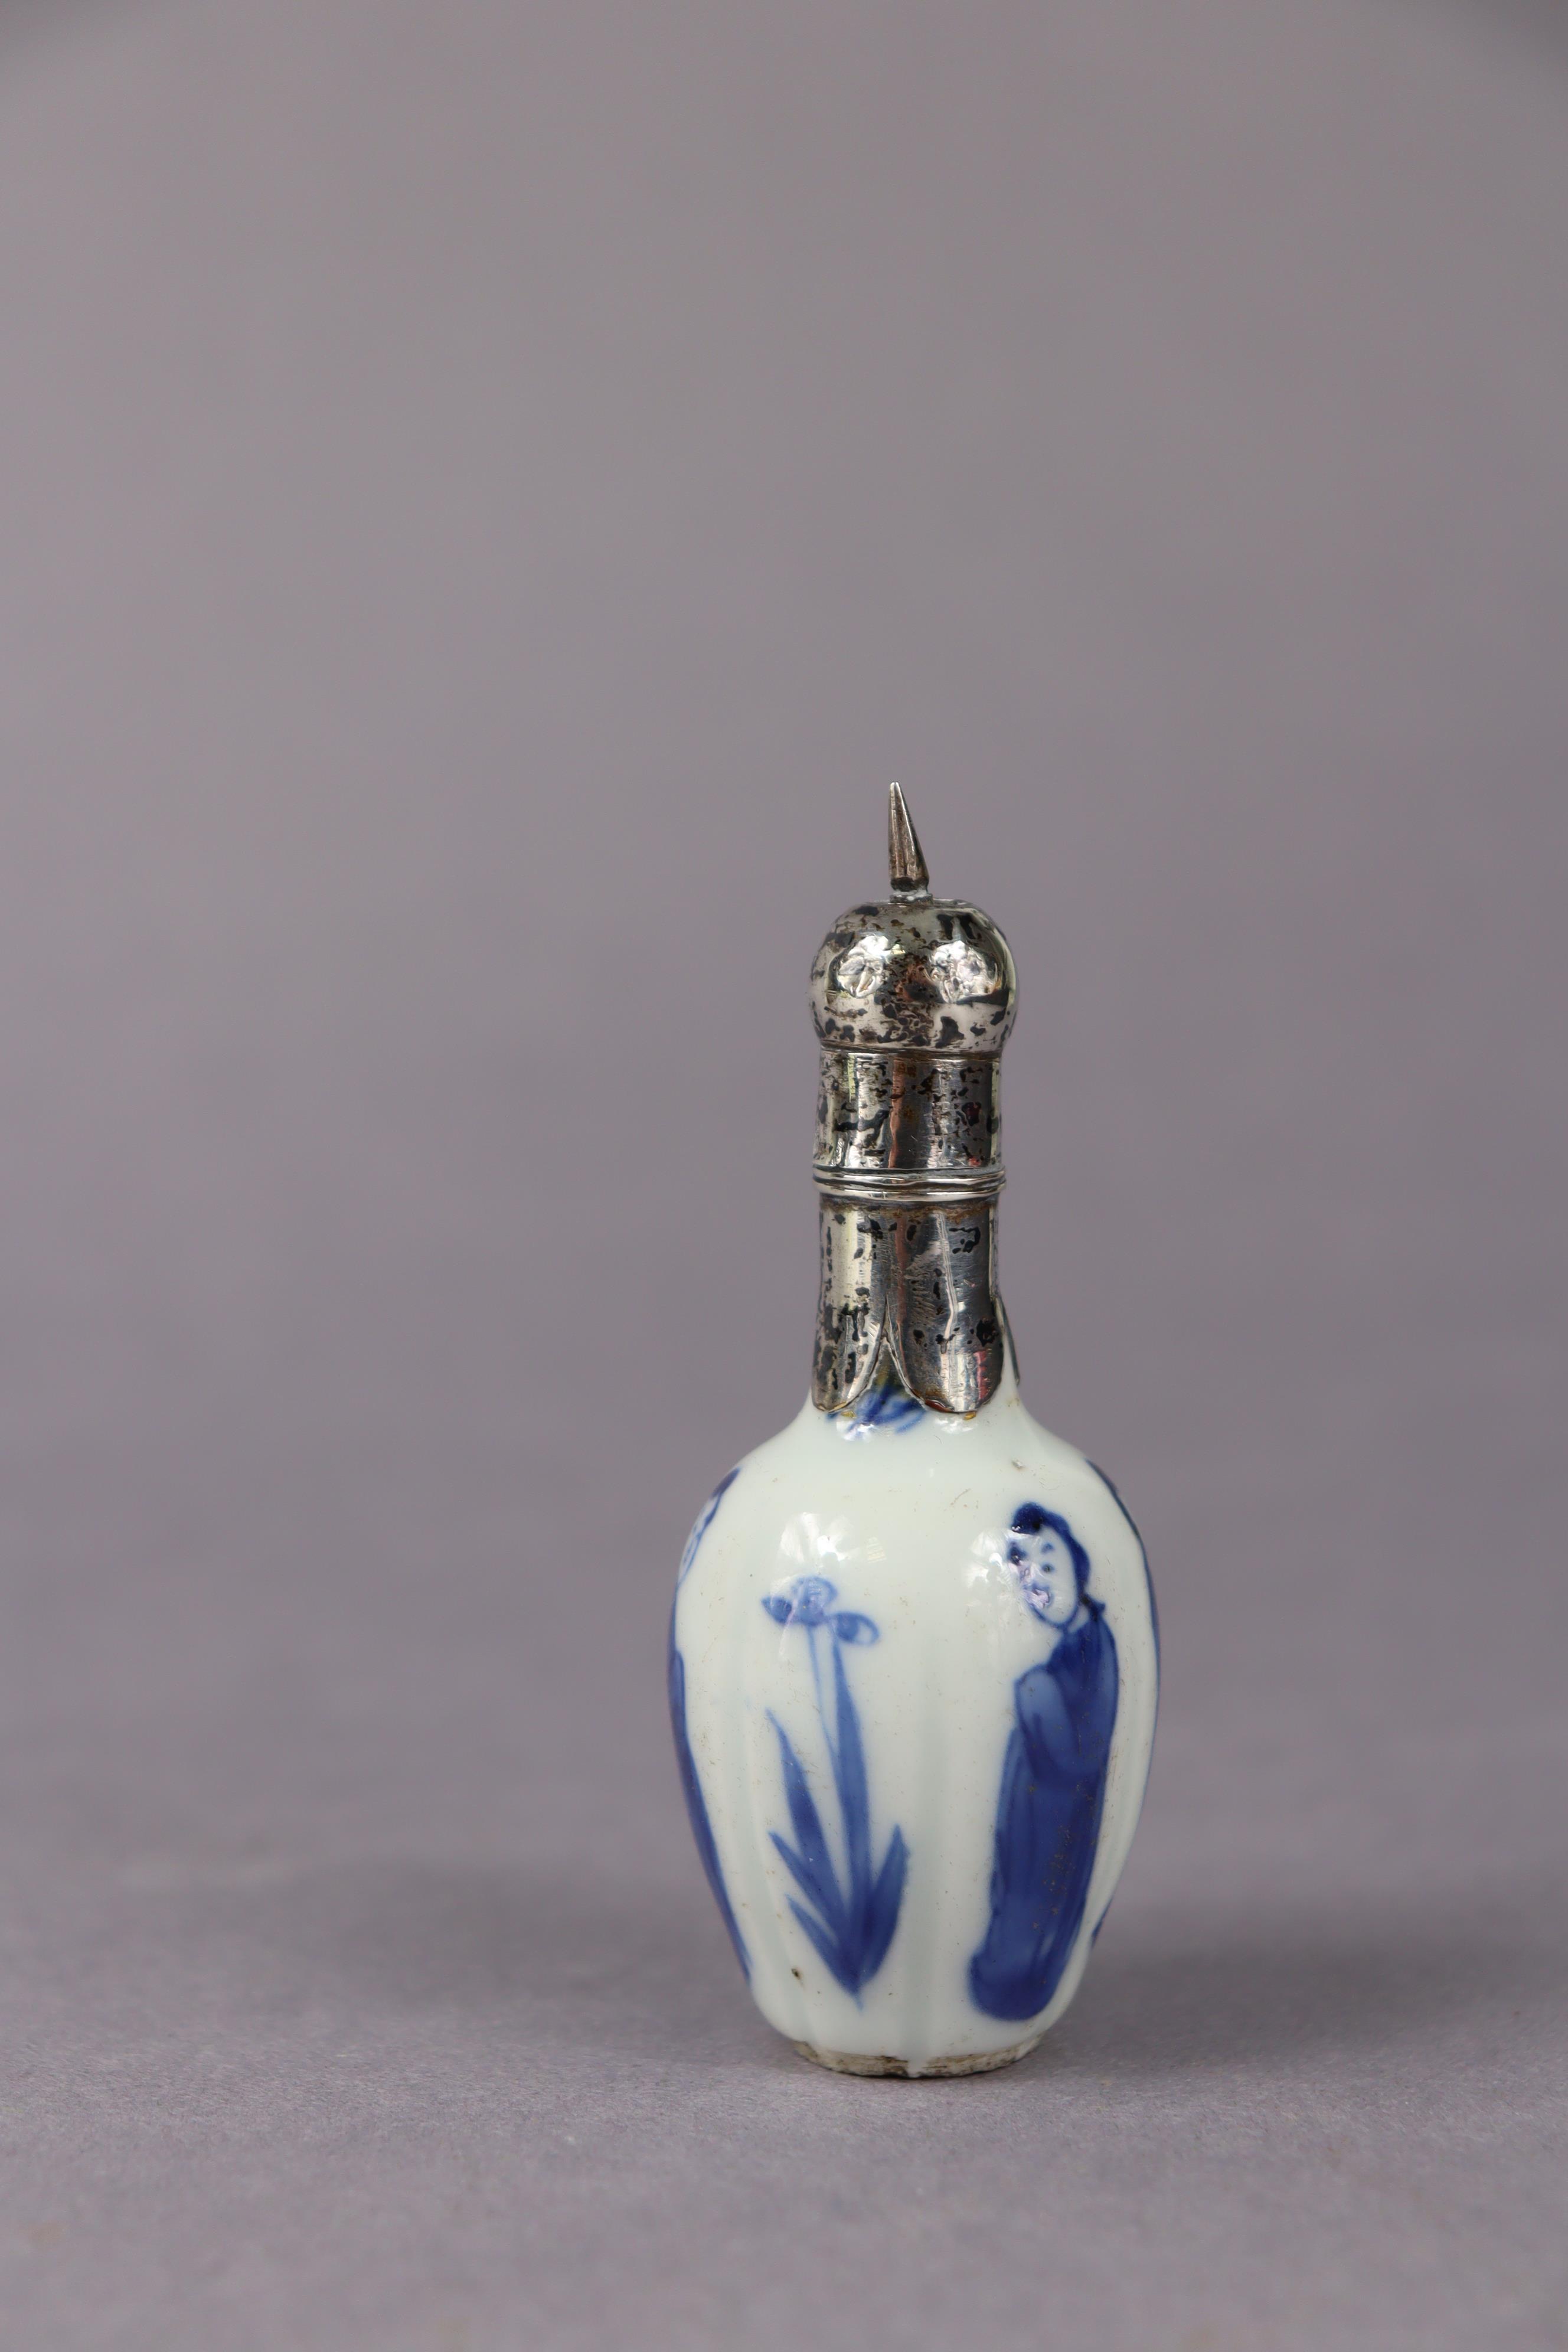 An early Chinese blue & white porcelain miniature lobed vase with standing figures & tall flowers, - Image 10 of 14